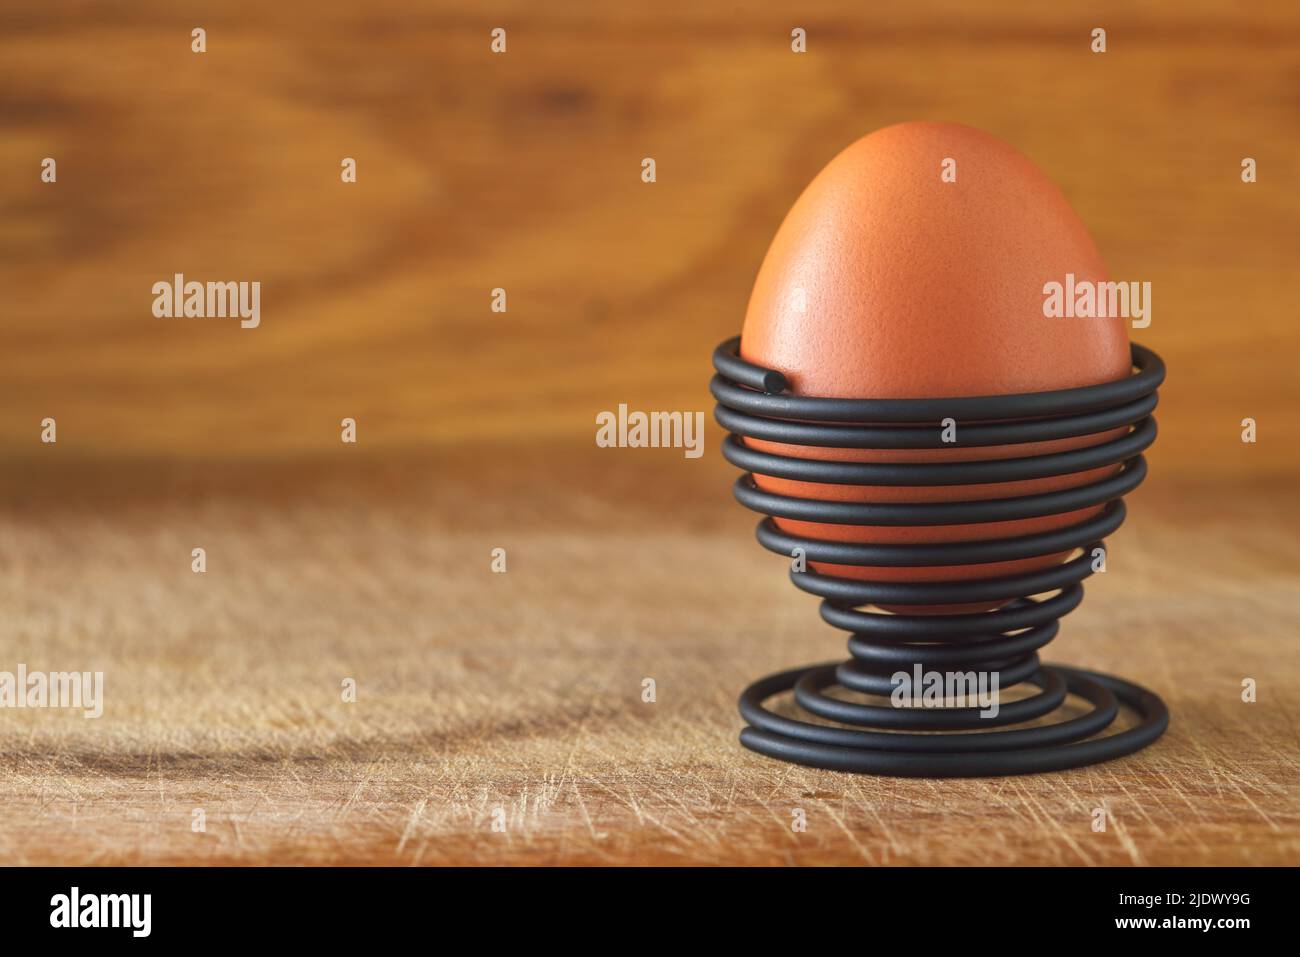 One boiled egg in a spiral-shaped metal support on wood background with copy space Stock Photo